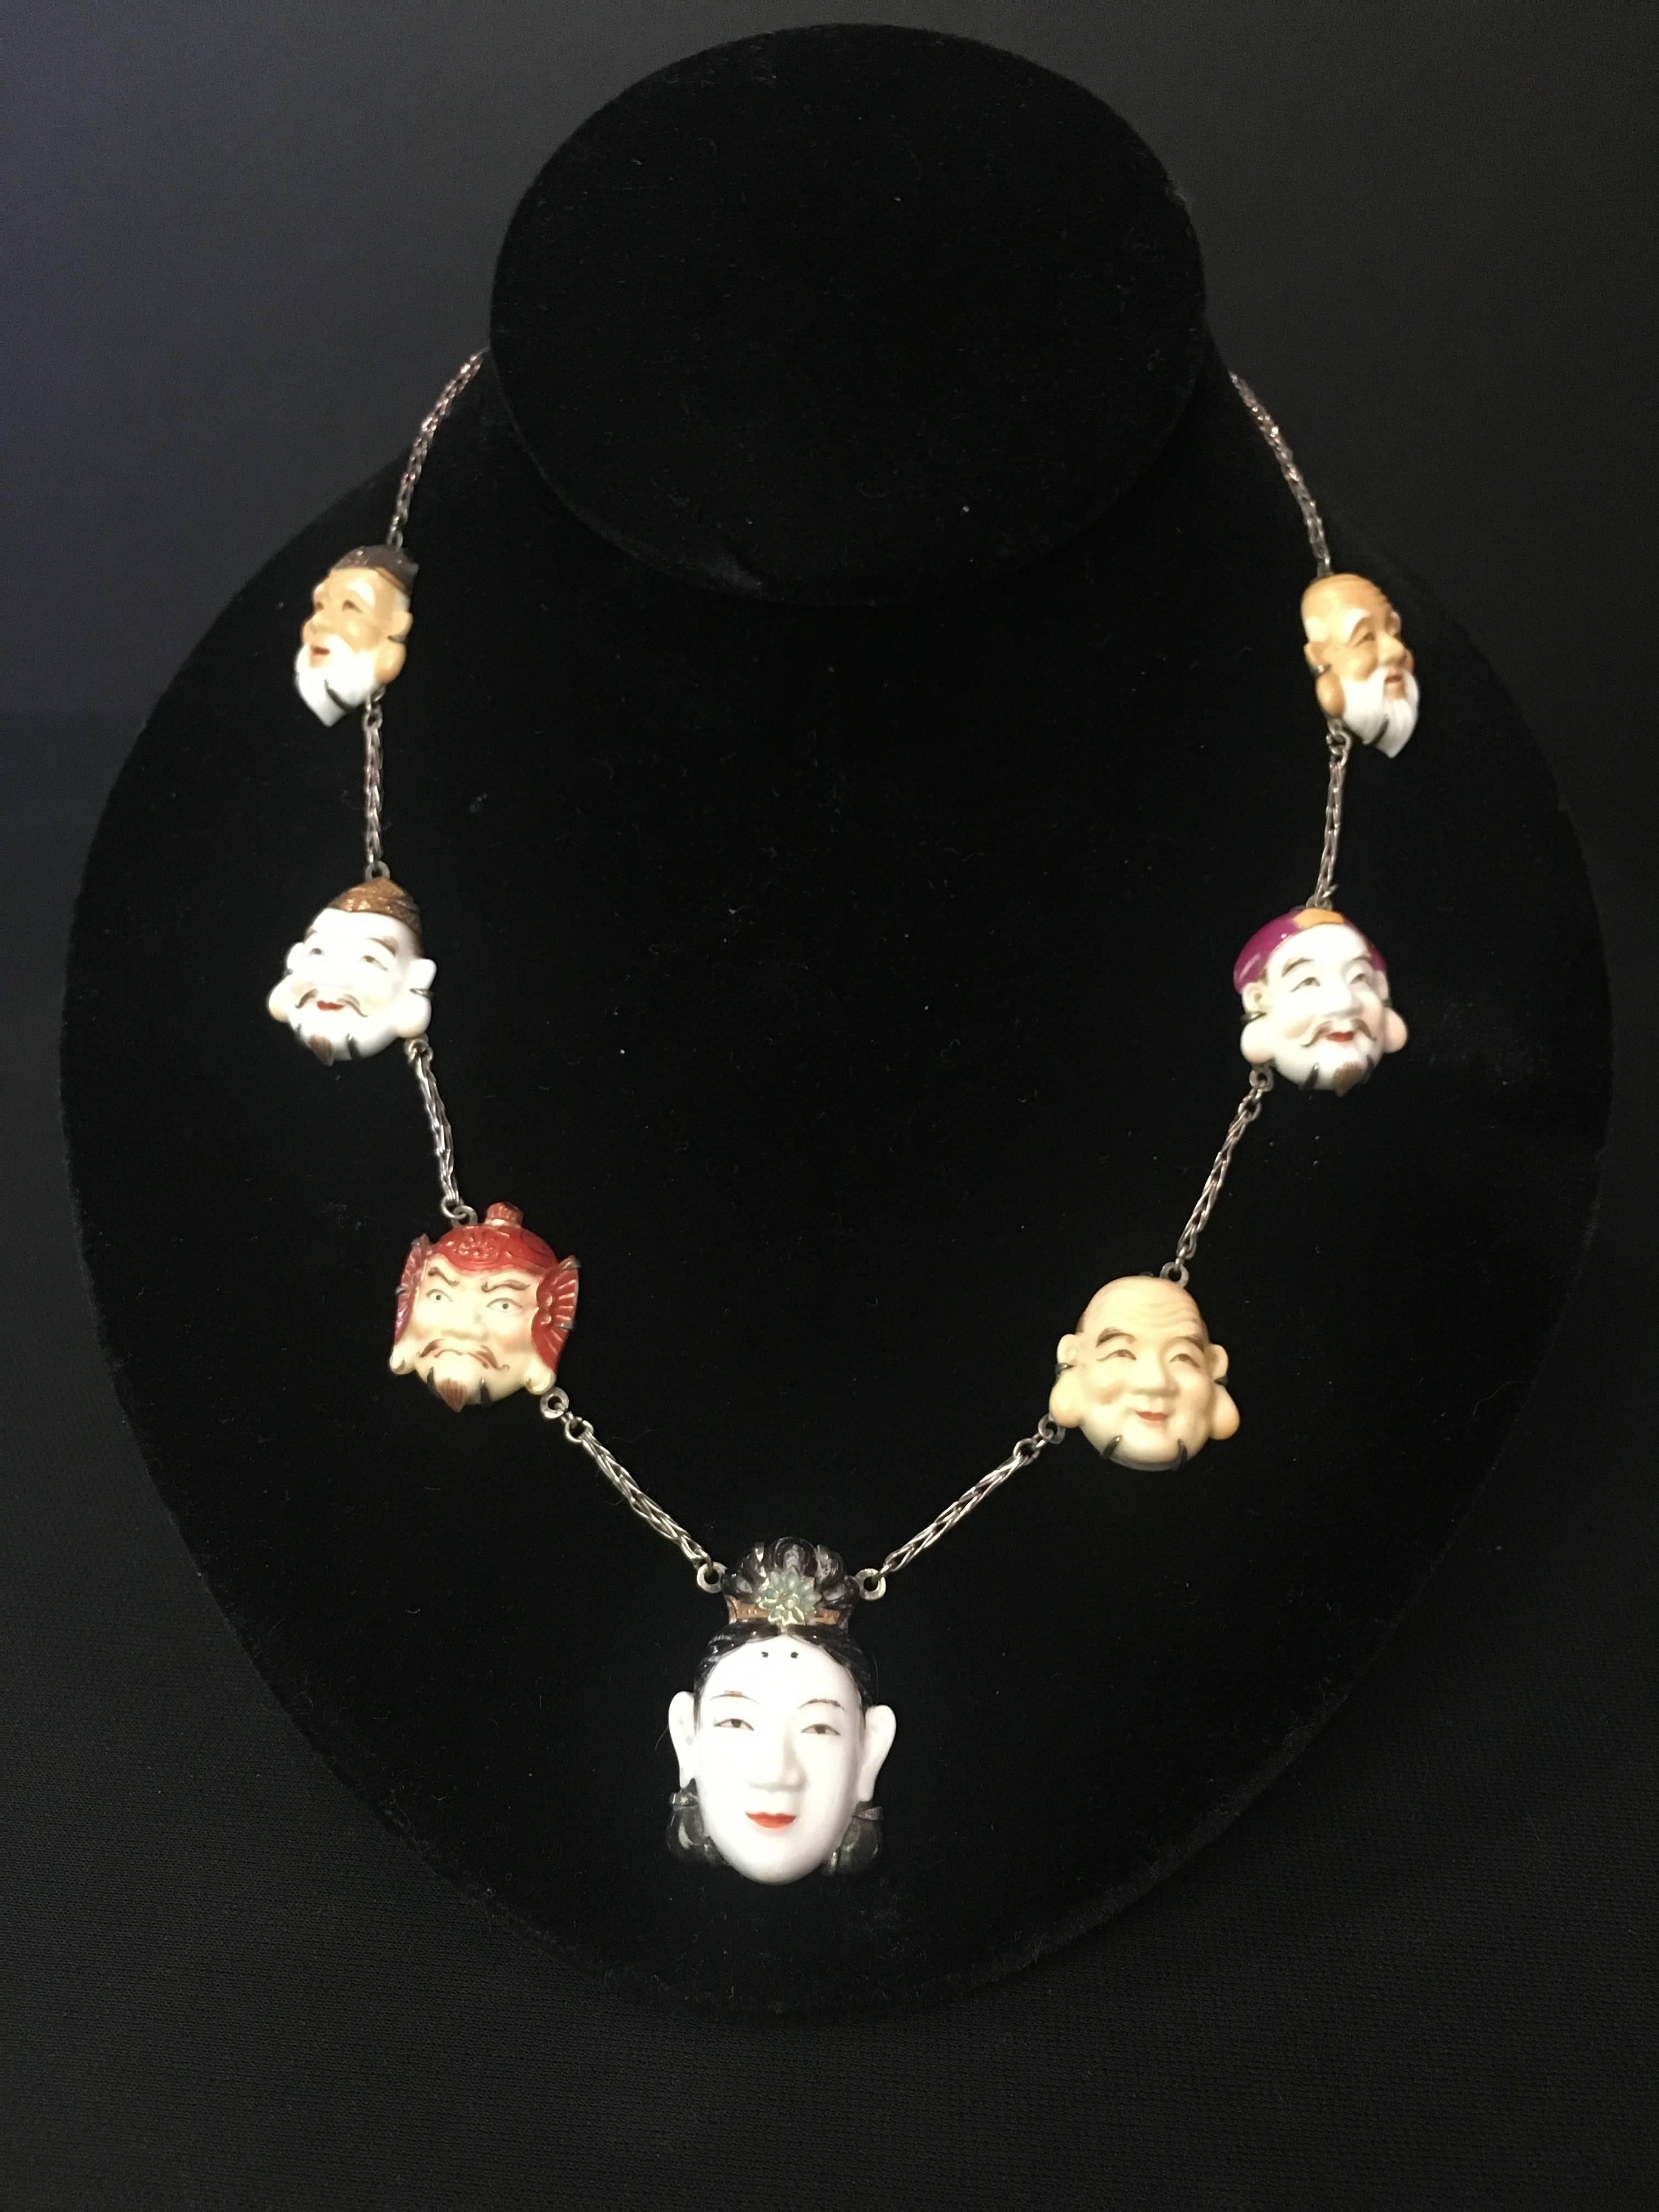 Spectacular  and extremely rare Toshikane Seven Lucky Gods necklace of porcelain faces set in silver. The detail on each Japanese deity is just incredible!  Excellent condition. The faces are divided by a braided silver chain which closes with a